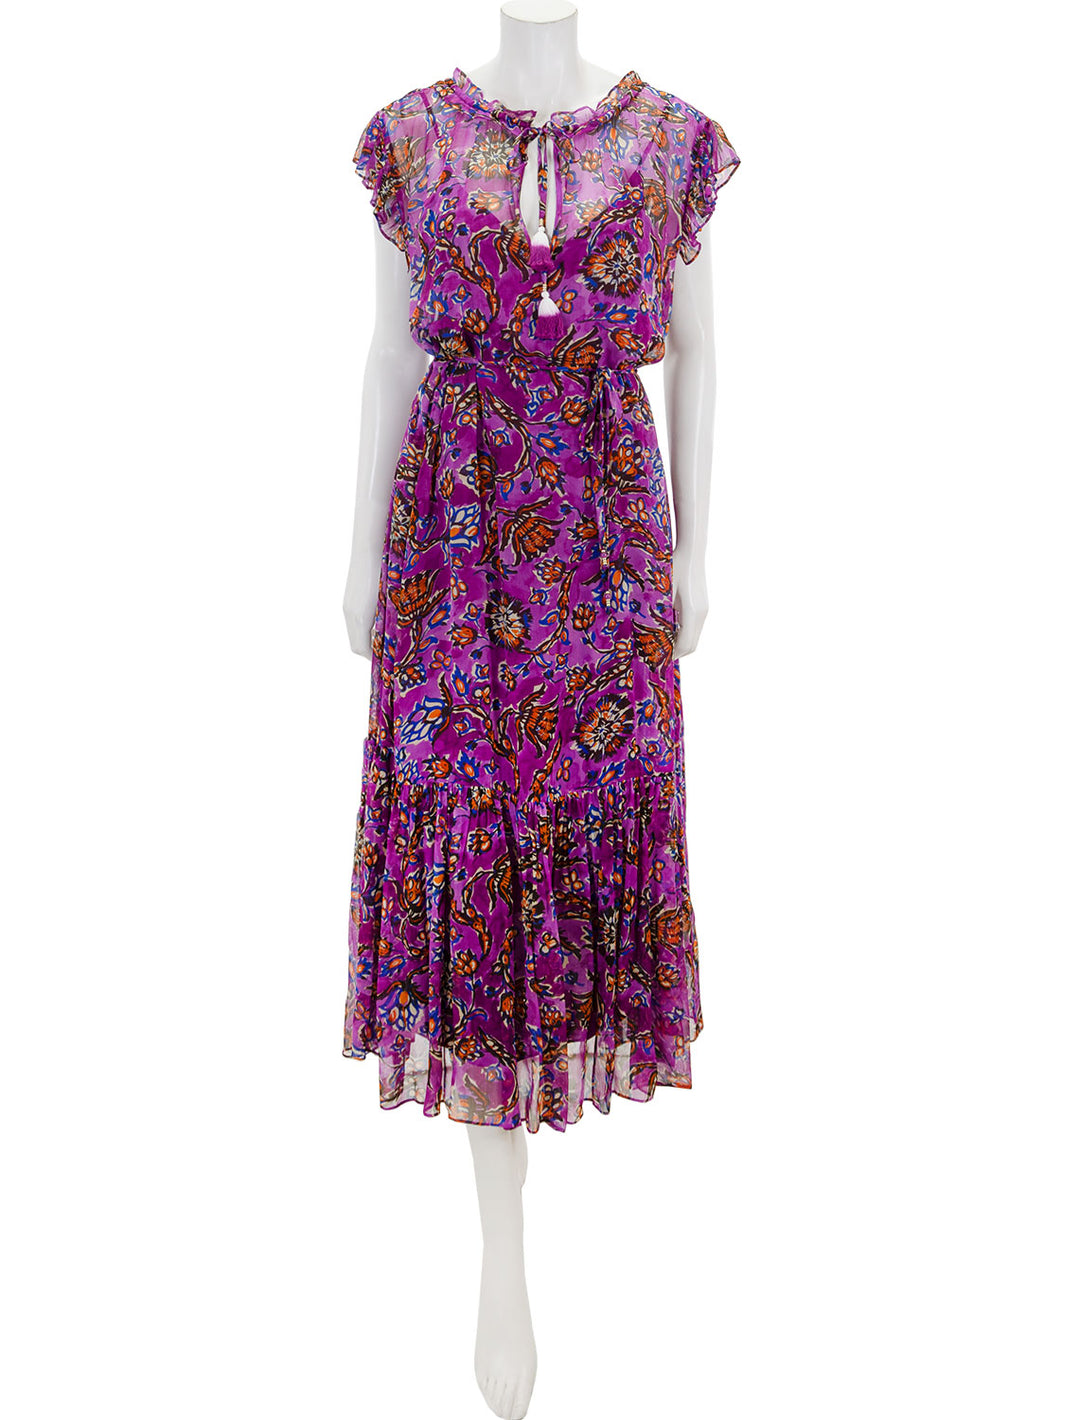 Front view of Vanessa Bruno's cristina dress in violet floral.